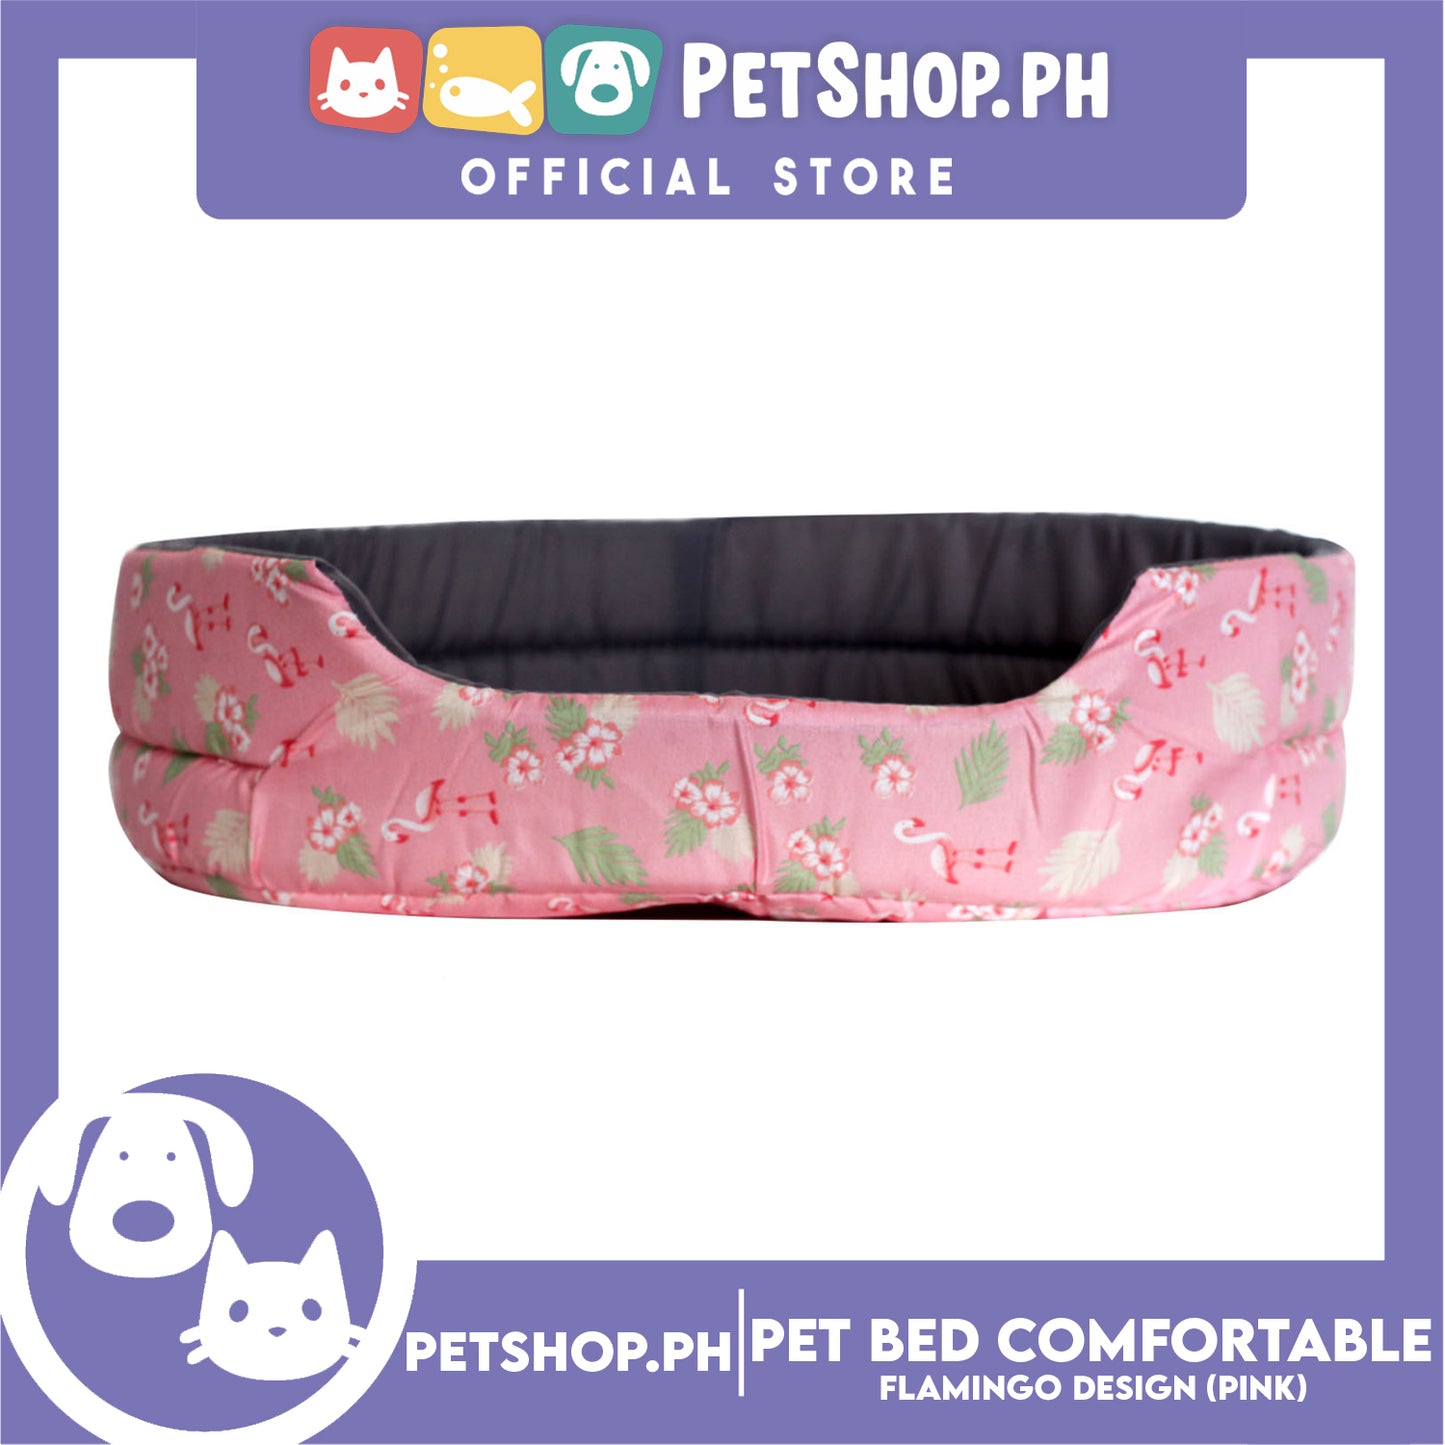 Pet Bed Comfortable Sleeping Bed with Flamingo Design 58x45x14cm for Dogs & Cats Pink